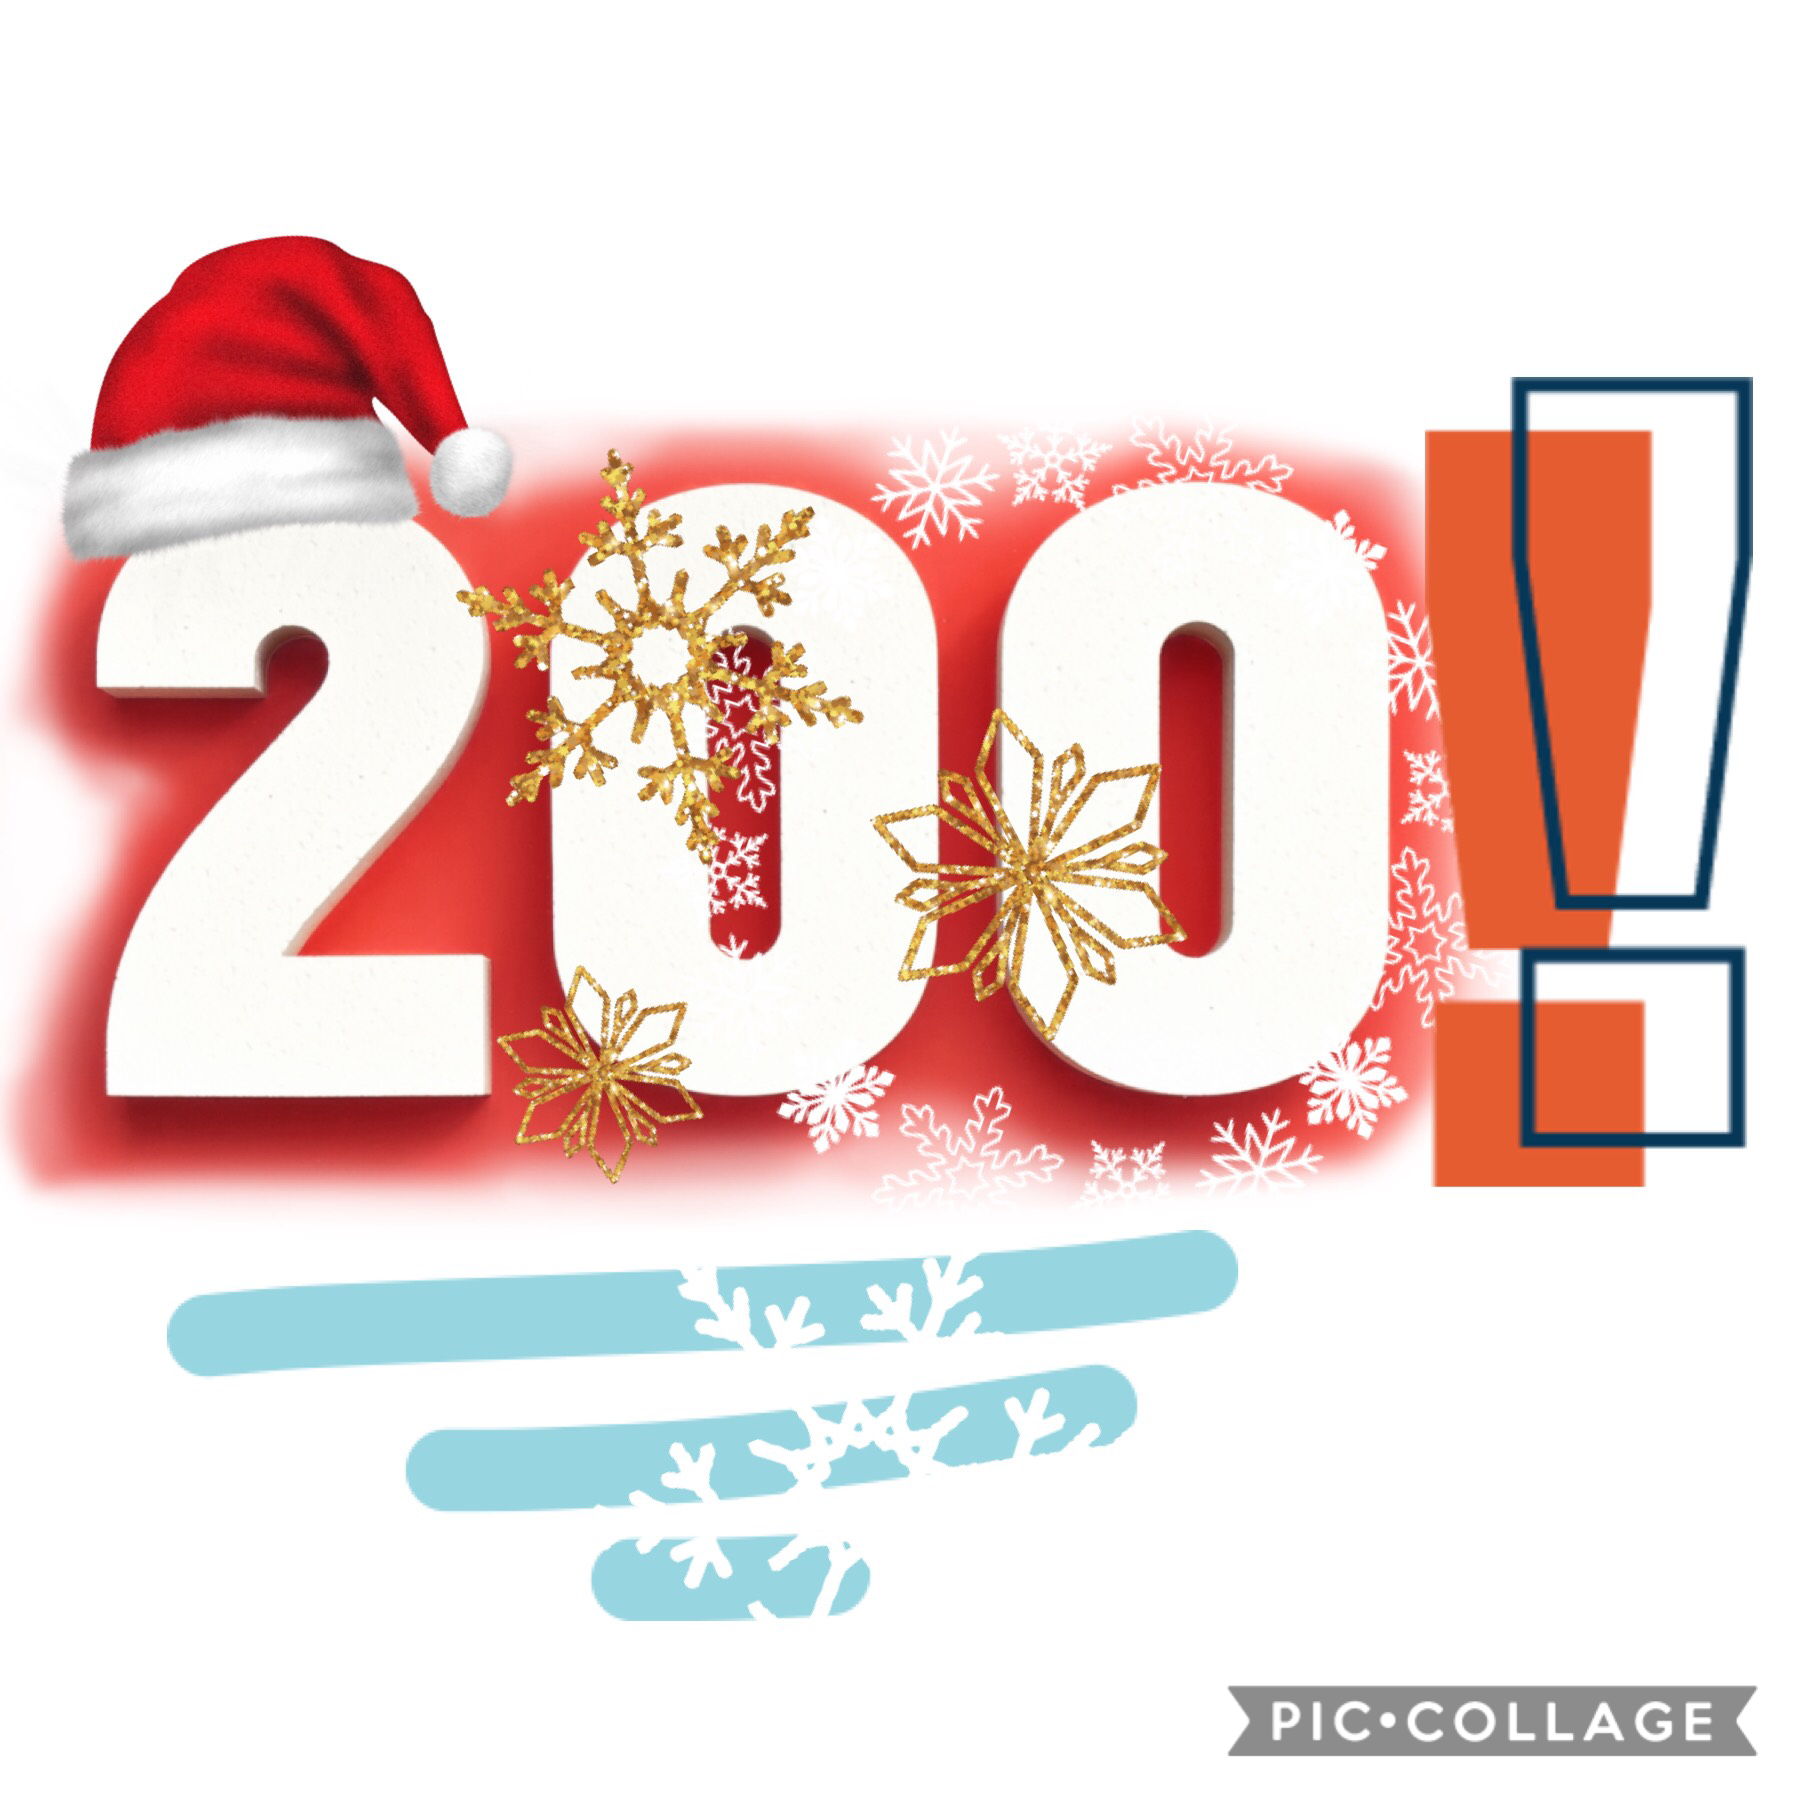 Thanks to everyone for 200 followers !!! Ik this is a little late but I had to do it anyway. Happy holidays and new year to everyone. 